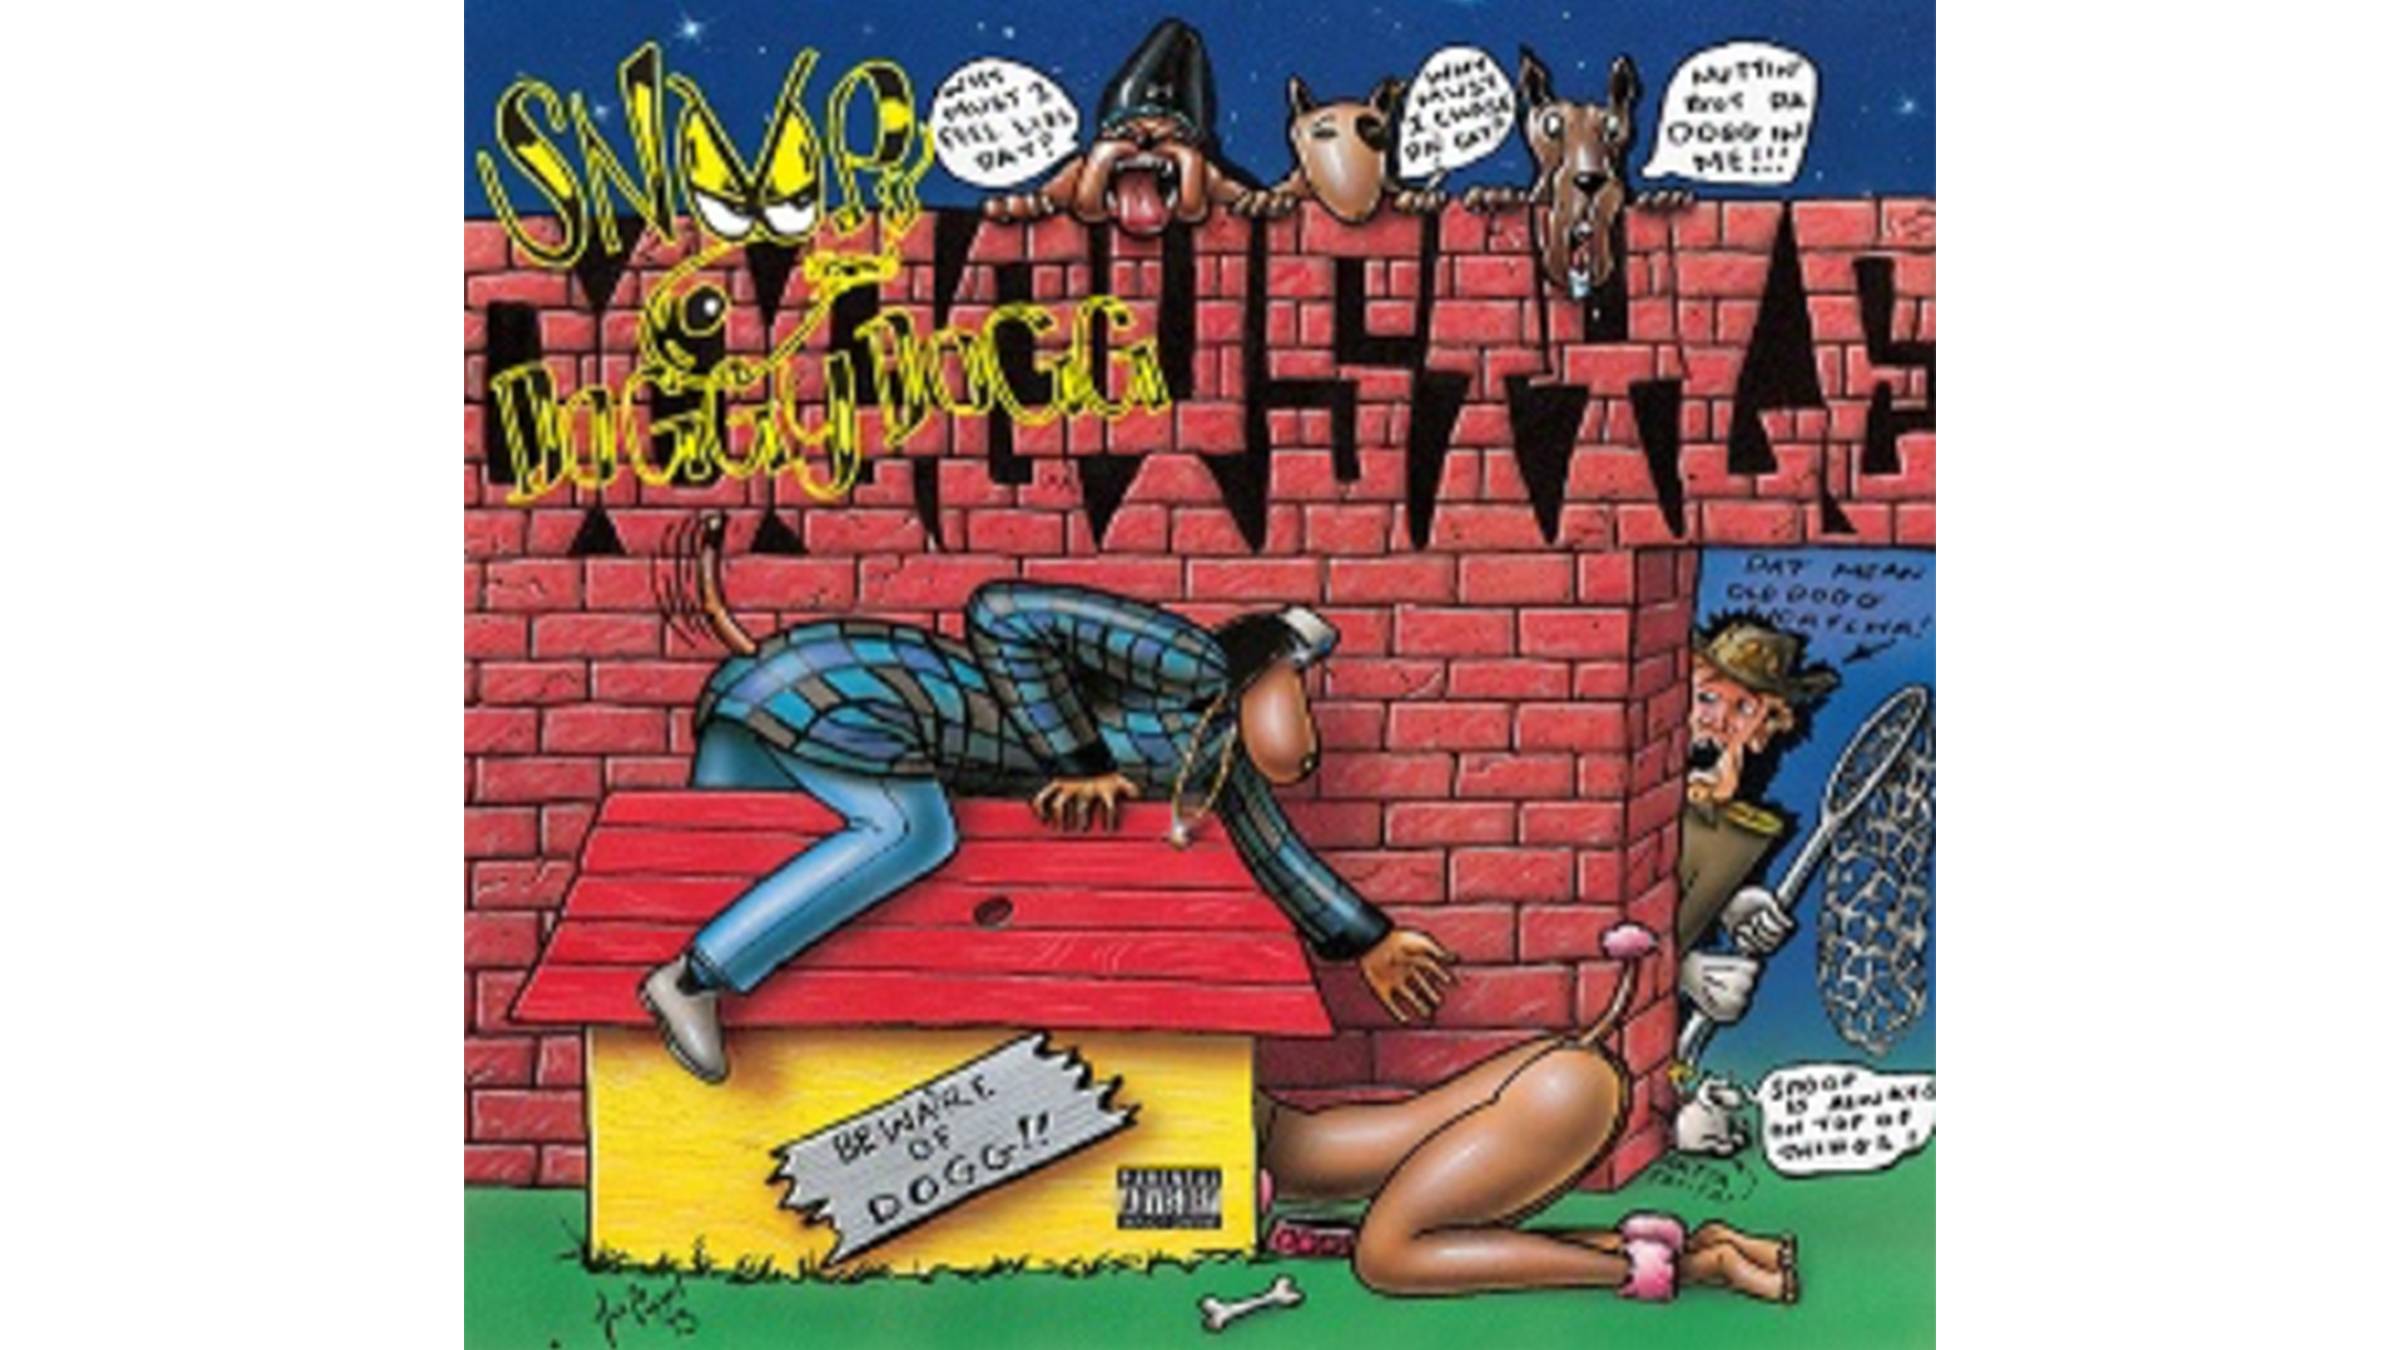 Revisiting Snoop Dogg's 'Doggystyle': A 30-Year Retrospective